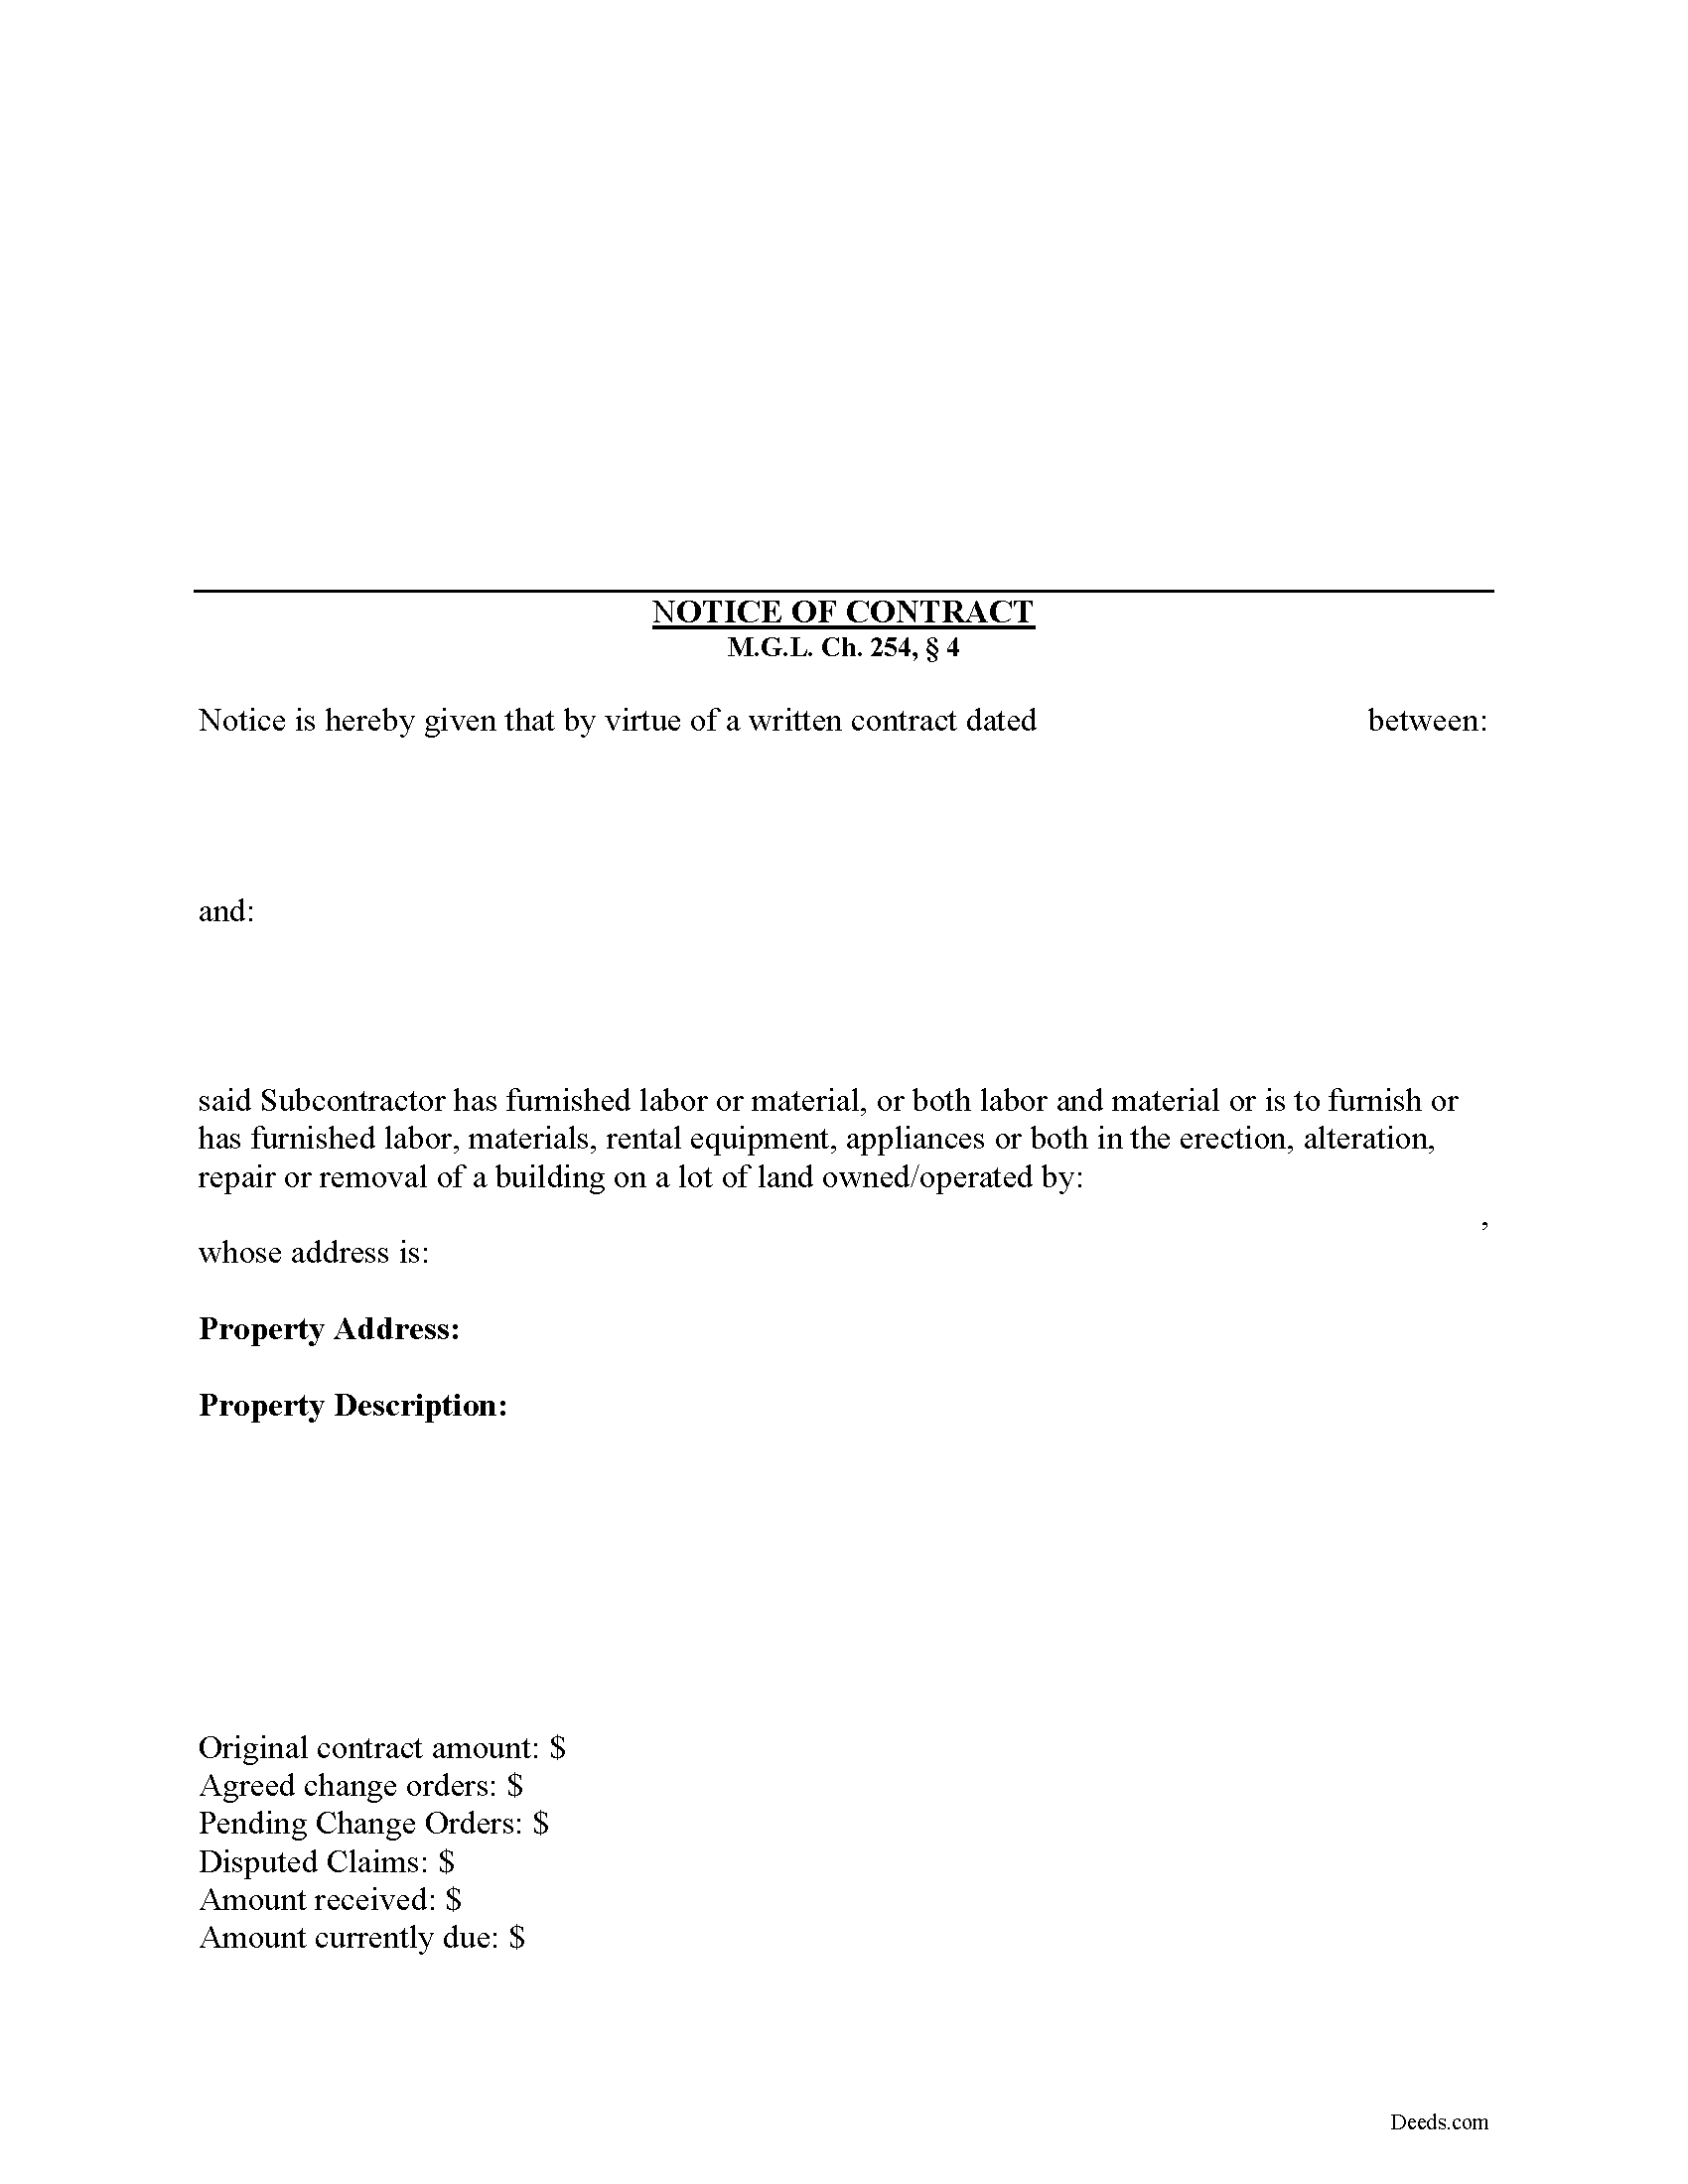 Notice of Contract Form